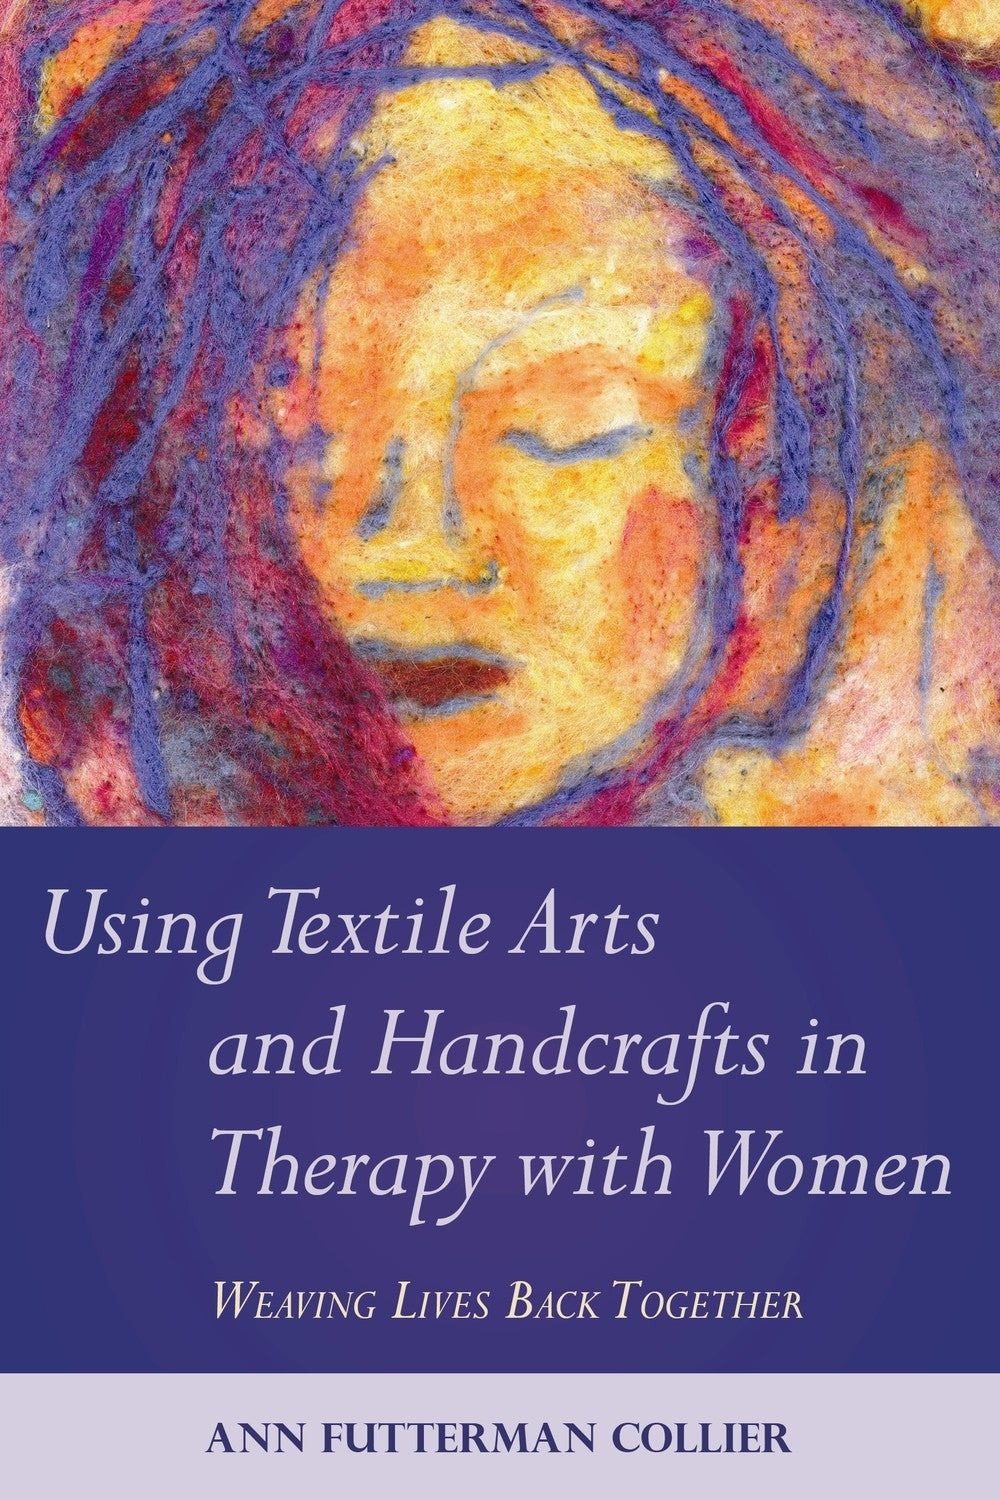 Using Textile Arts and Handcrafts in Therapy with Women by Ann Collier